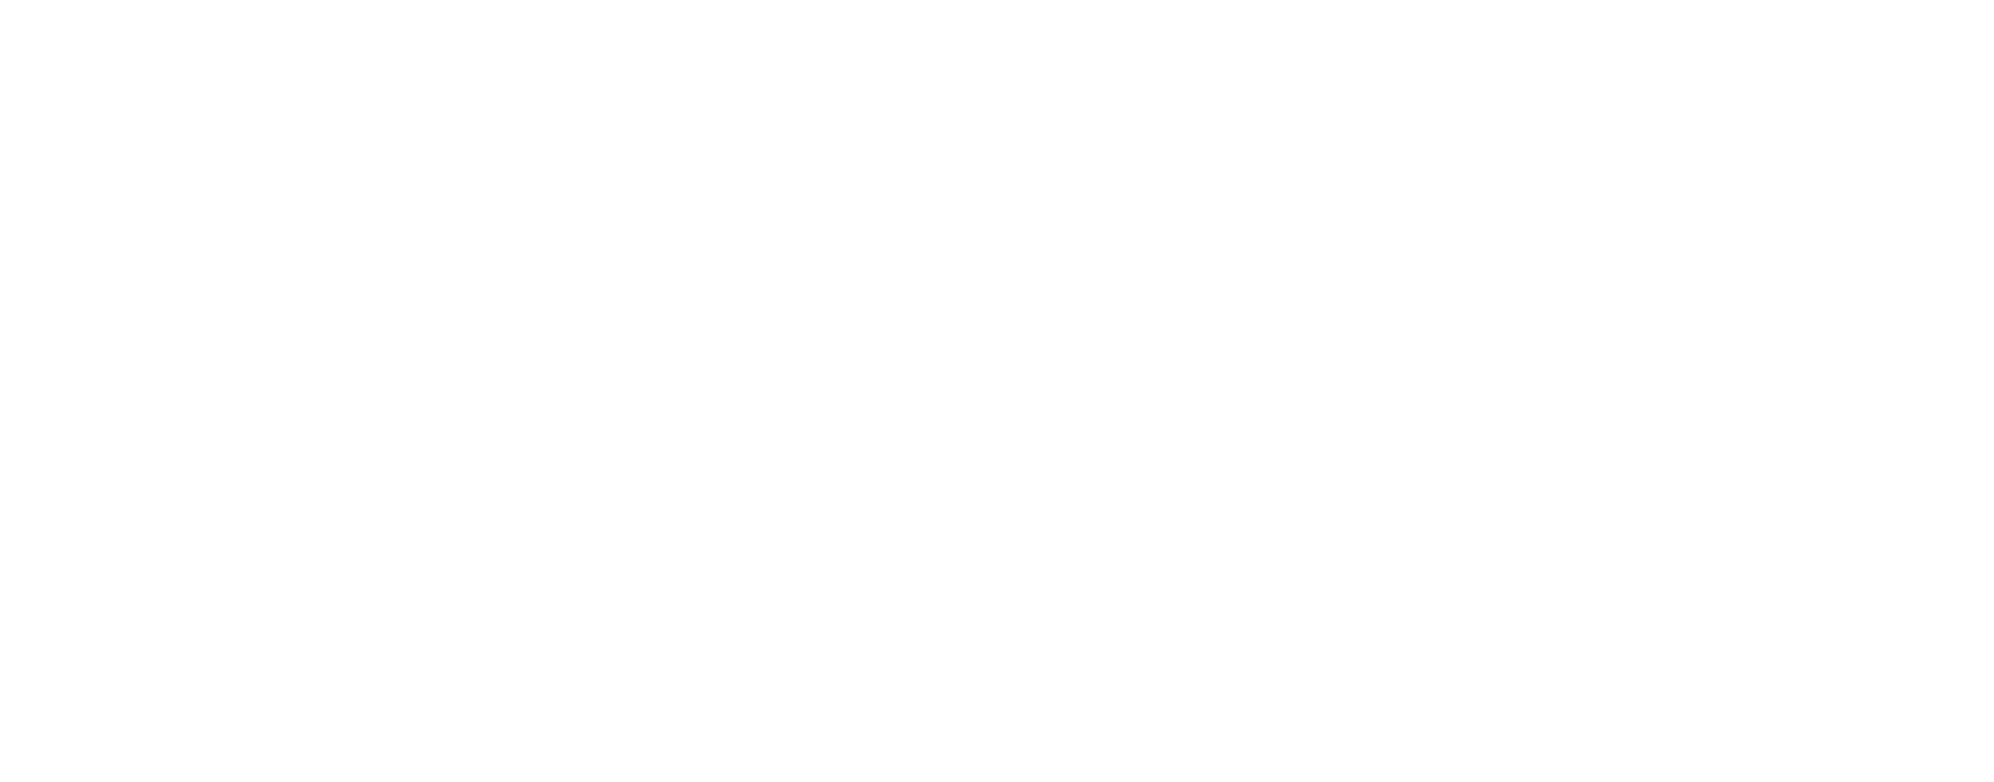 OpenFF Toolkit 0.14.4+0.gd296ade.dirty documentation logo